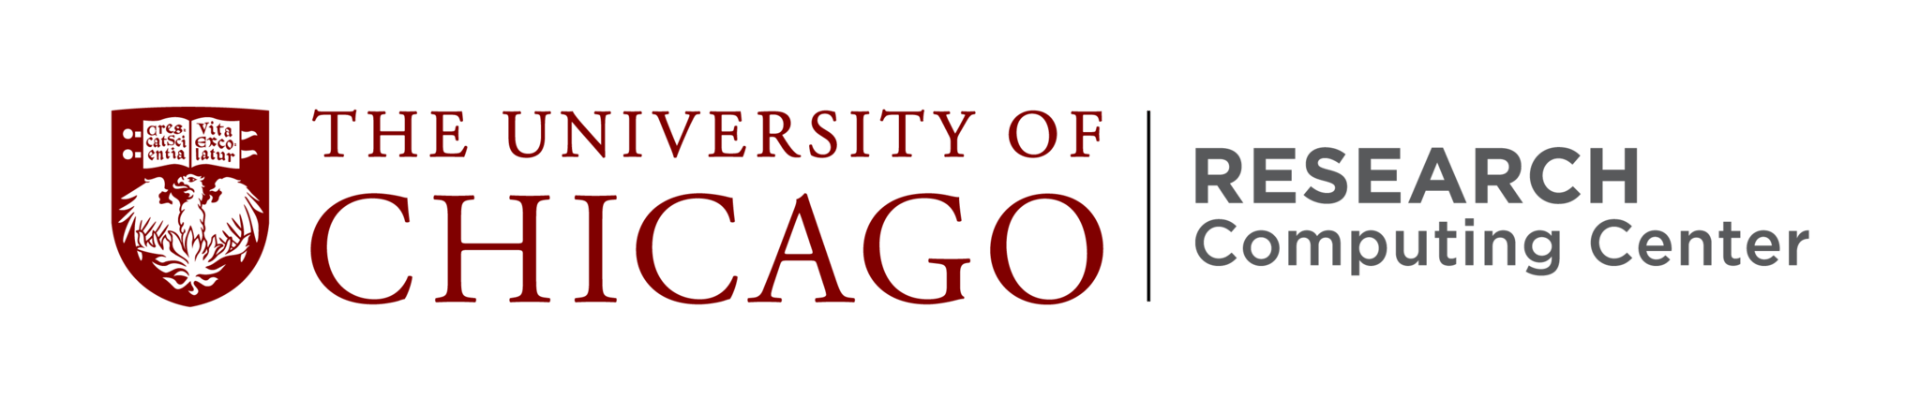 The University of Chicago | Your Signature